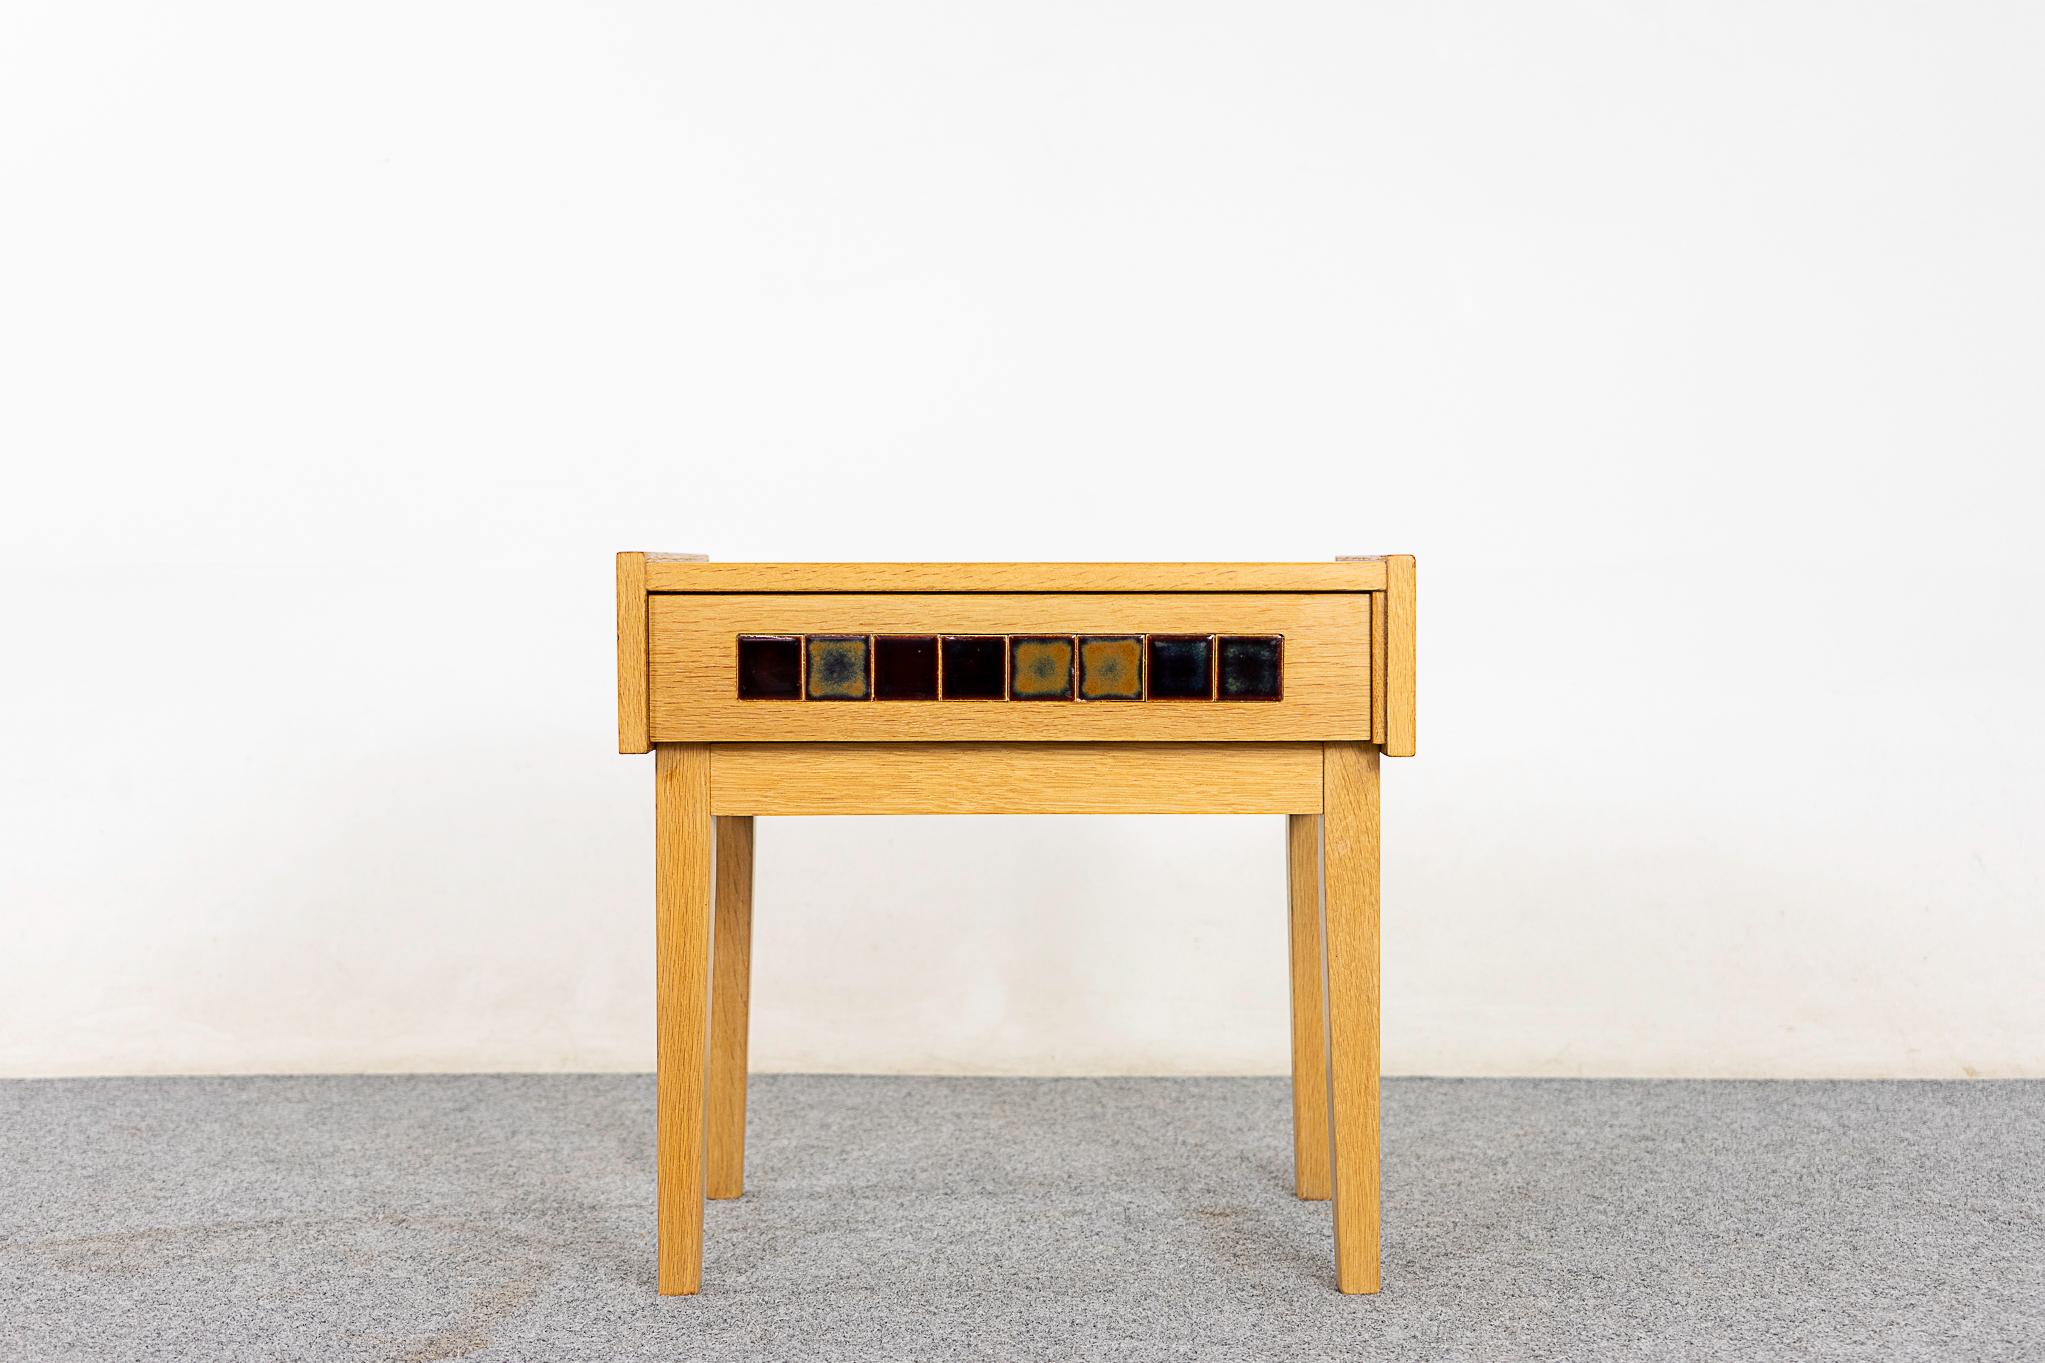 Oak & tile mid-century bedside table, circa 1960's. Veneered case with solid legs. Sleek dovetailed drawer with ceramic tiles for a pop of color. 

Please inquire for remote and international shipping rates.